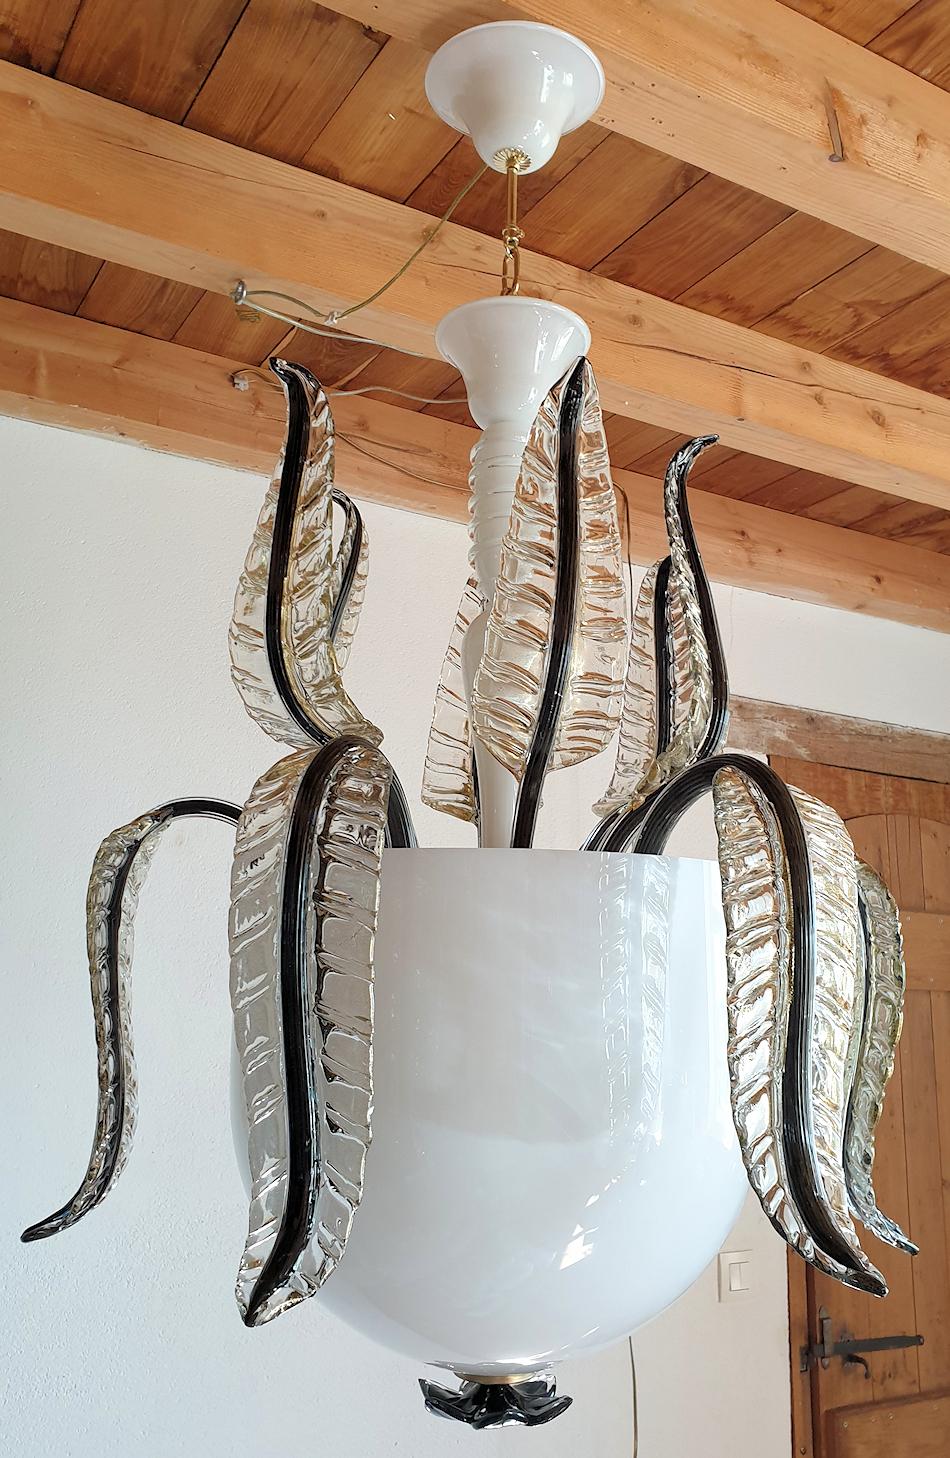 Vintage Murano glass large lantern or chandelier, attributed to Seguso, Italy, 1970s.
The large Mid-Century Modern Murano chandelier is made of a delicate white translucent glass bowl, nesting the lights; clear and gold handmade leaves, with black